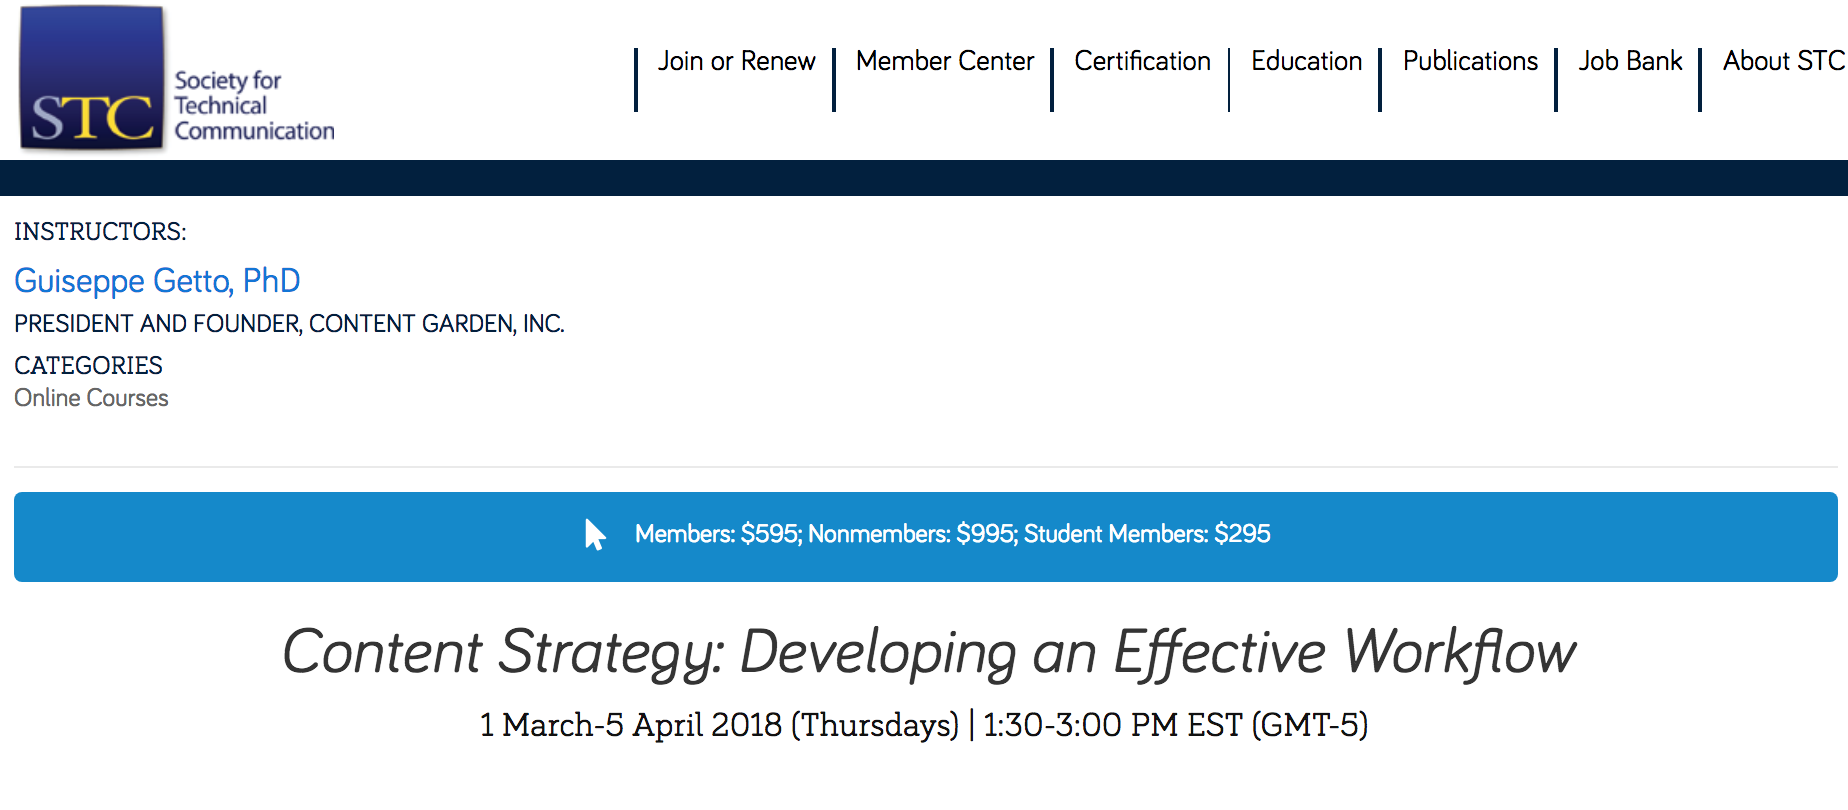 A screenshot of the course "Content Strategy: Developing an Effective Workflow" on the STC website, published to "Learn Content Strategy: Online Class for the Society for Technical Communication"